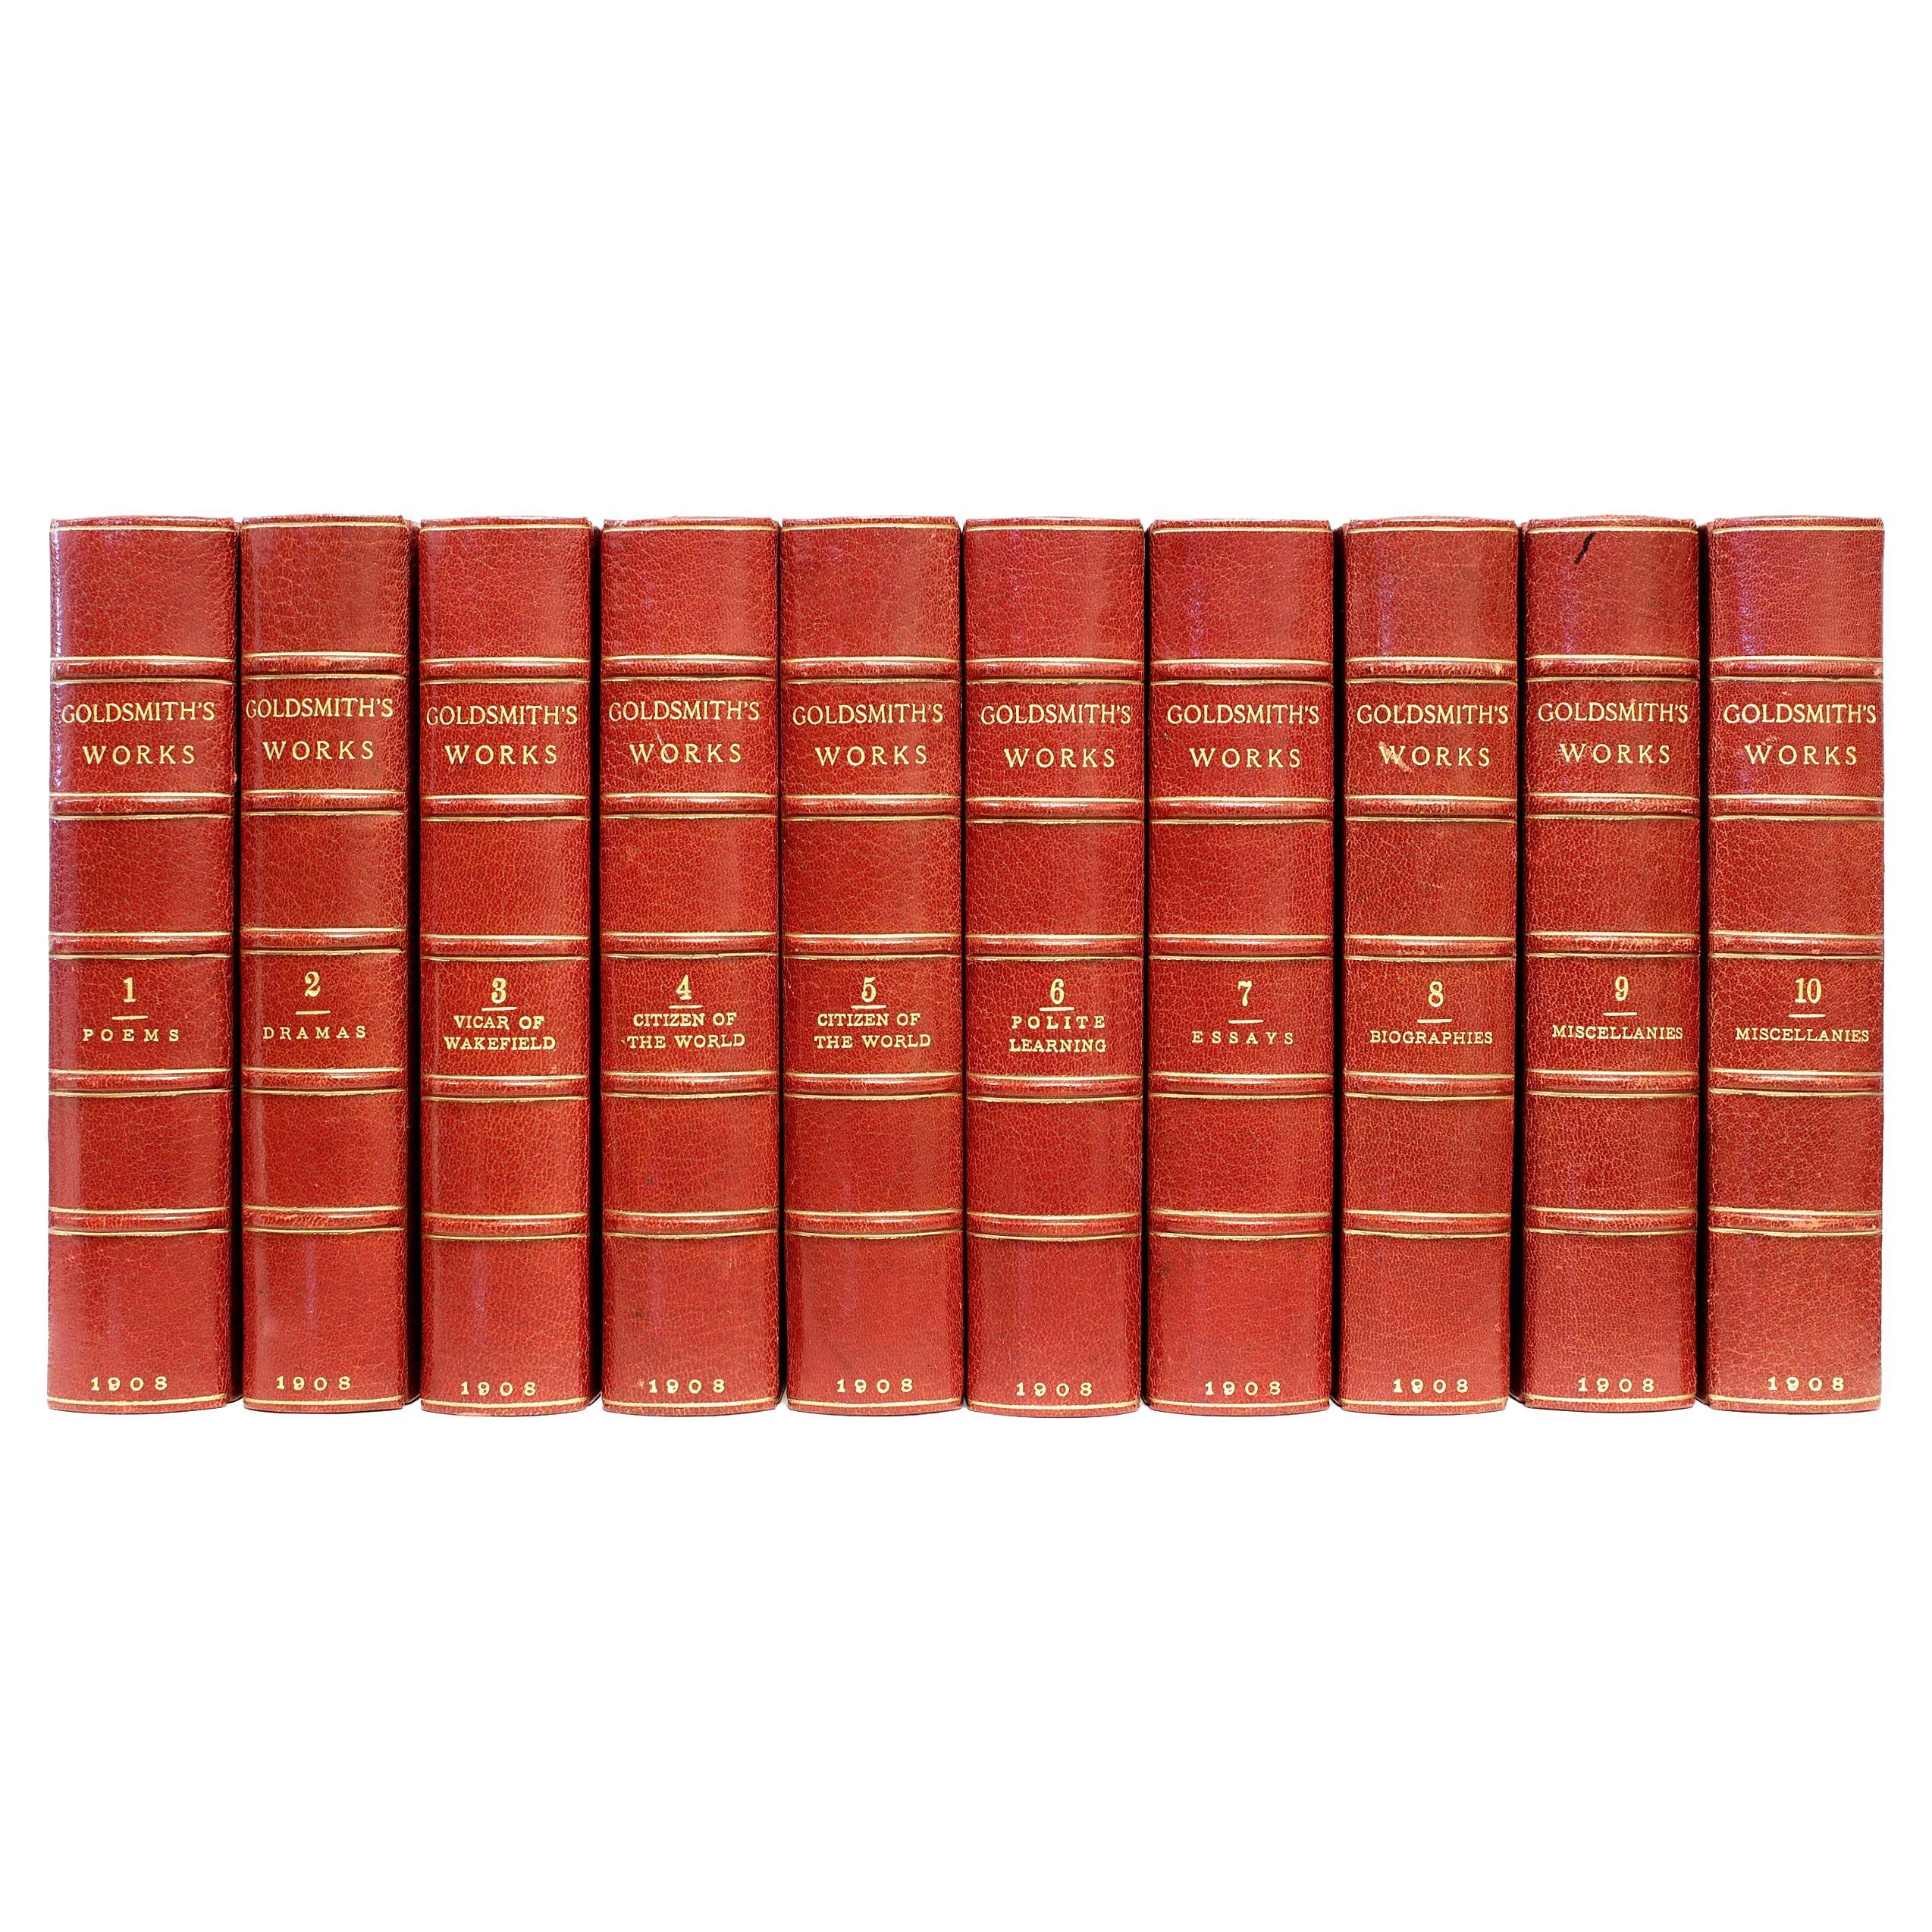 Works of Oliver Goldsmith-10 Vols.-Turk's Head Edition-in a Fine Binding For Sale